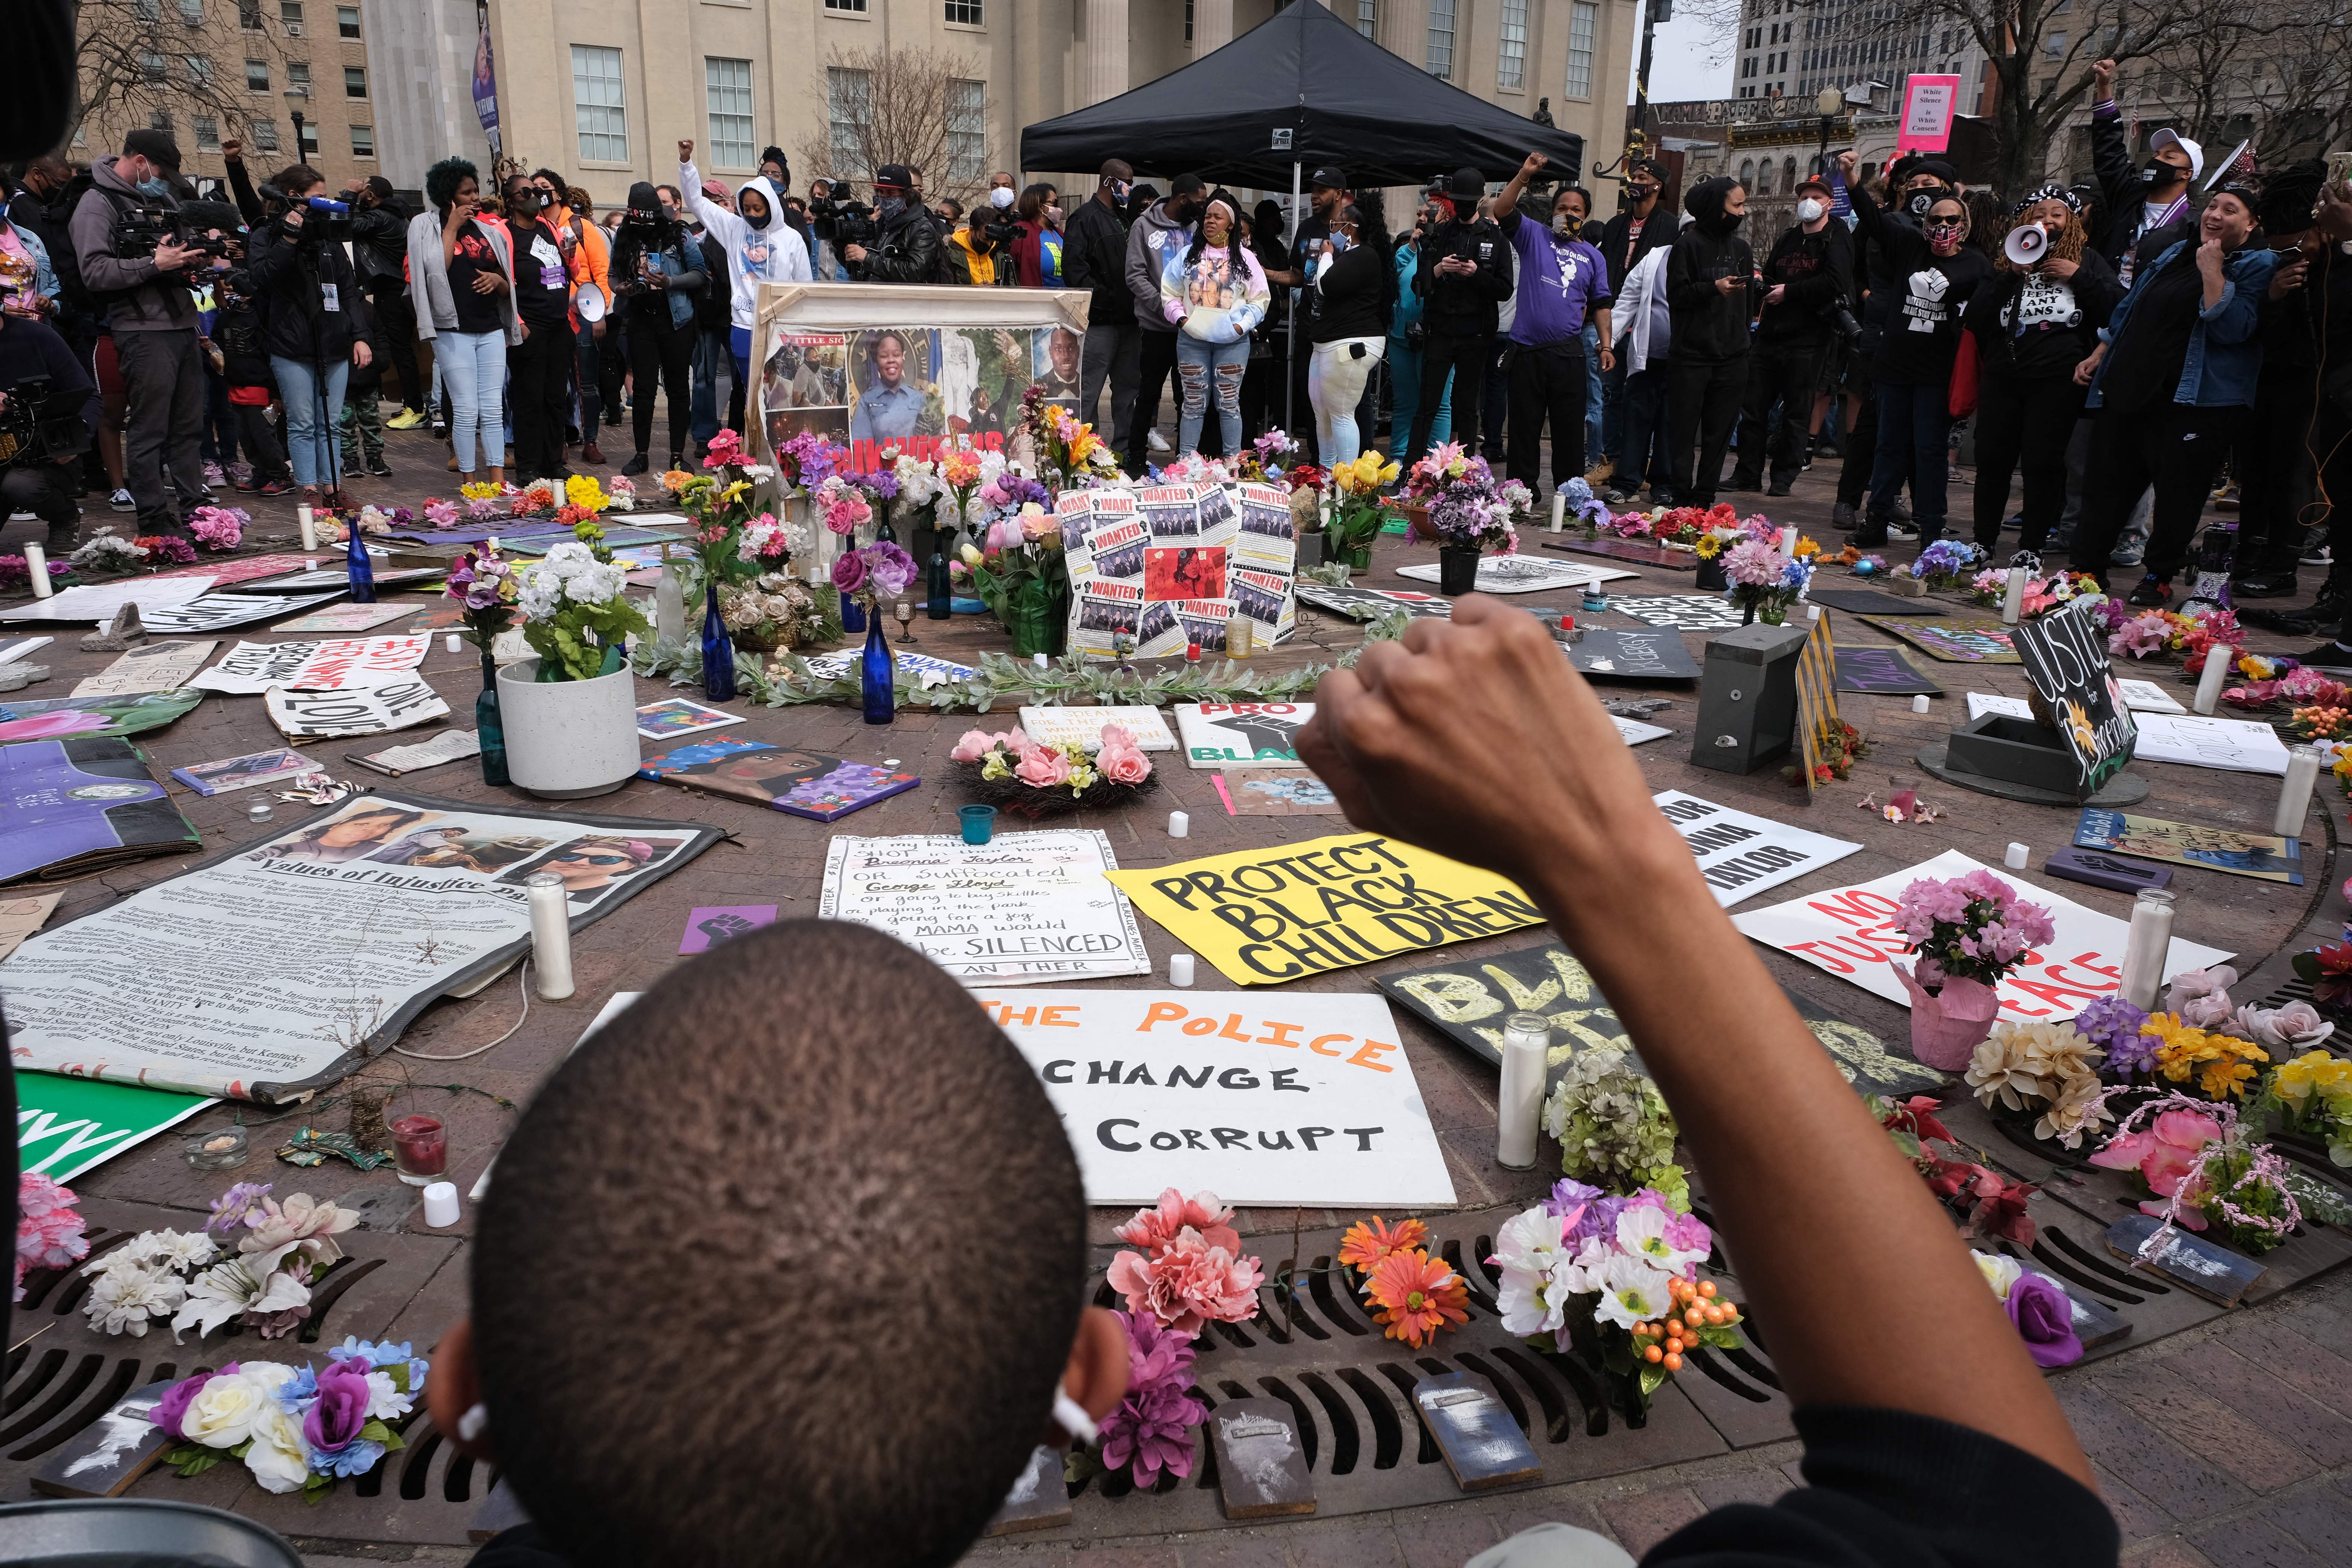 About 100 people stand in a circle; in the middle are signs with messages like “Protect Black Children” and “Change Corrupt Police” along with dozens of bouquets. In the foreground, a Black protester whose back is to the camera raises a fist.